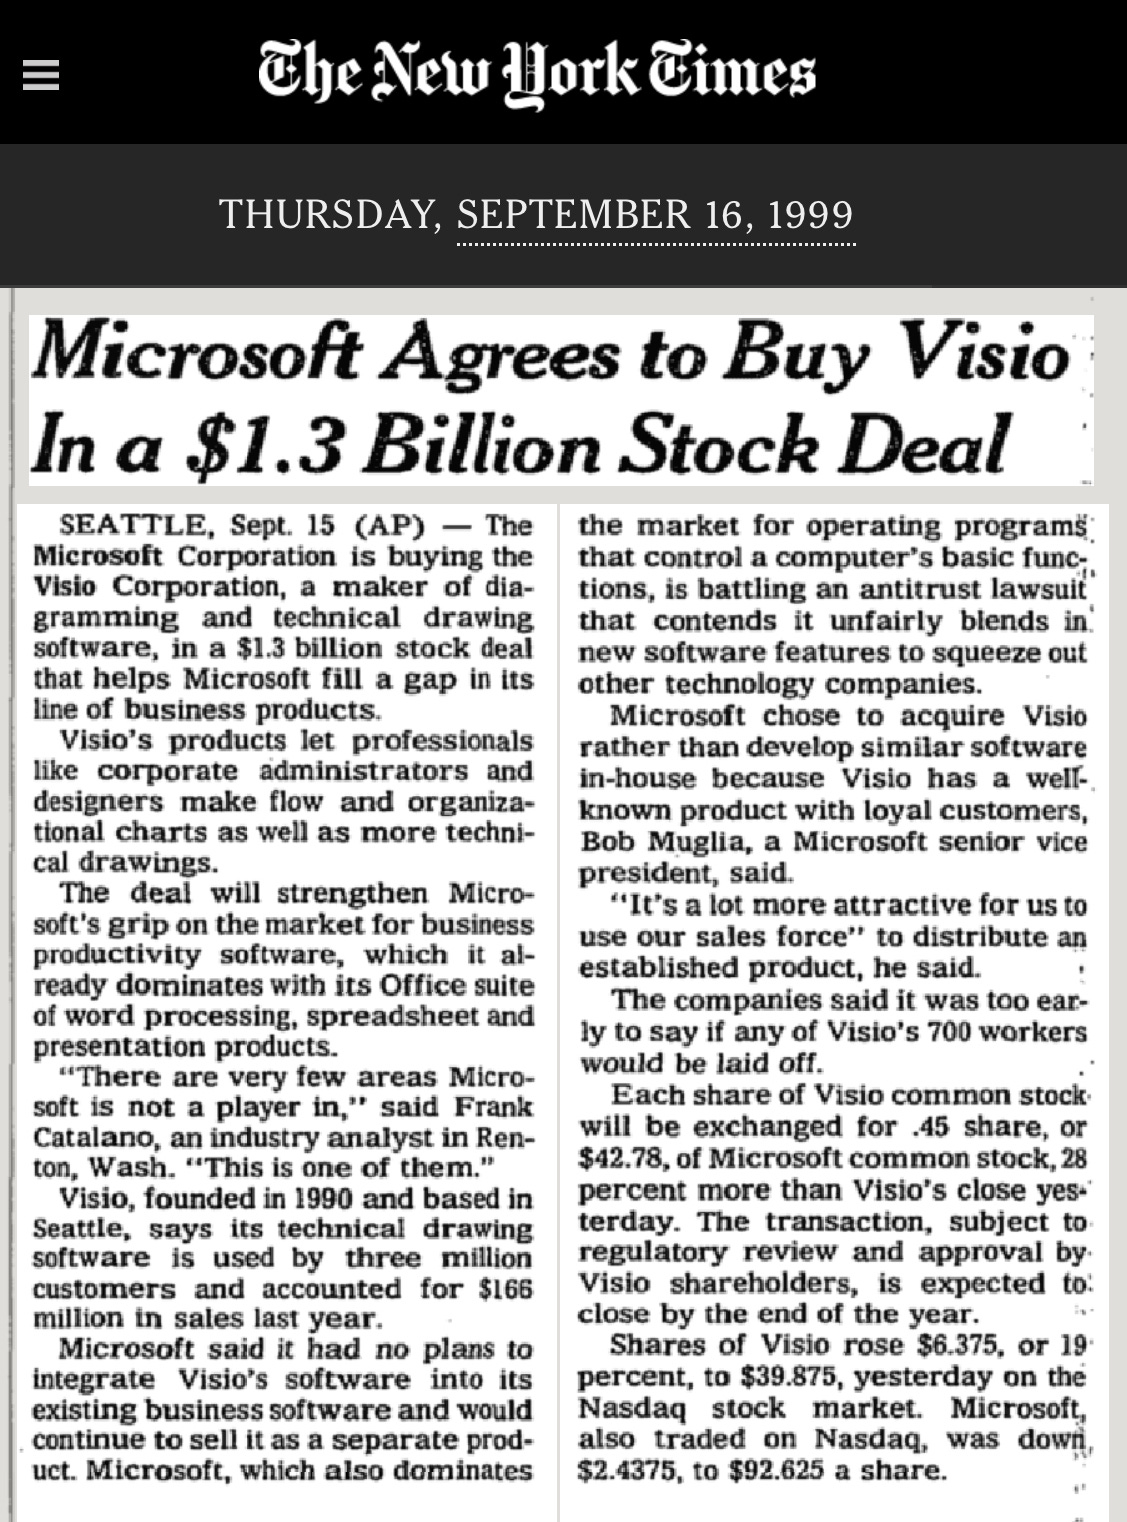 Microsoft Agrees to Buy Visio In a $1.3 Billion Stock Deal SEATTLE, Sept. 15 (AP) - The the market for operating programs. Microsoft Corporation is buying the that control a computer's basic func; Visio Corporation, a maker of dia- tions, is battling an antitrust lawsuit gramming and technical drawing that contends it unfairly blends in software, in a $1.3 billion stock deal new software features to squeeze out that helps Microsoft fill a gap in its other technology companies. line of business products. Microsoft chose to acquire Visio Visio's products let professionals rather than develop similar software like corporate administrators and in-house because Visio has a well-designers make flow and organiza- known product with loyal customers, tional charts as well as more techni- Bob Muglia, a Microsoft senior vice cal drawings. president, said. The deal will strengthen Micro- "It's a lot more attractive for us to soft's grip on the market for business use our sales force" to distribute an productivity software, which it al- established product, he said. . ready dominates with its Office suite The companies said it was too ear- of word processing, spreadsheet and ly to say if any of Visio's 700 workers presentation products. "There are very few areas Micro- would be laid off. Each share of Visio common stock soft is not a player in,' said Frank Catalano, an industry analyst in Ren- will be exchanged for .45 share, or ton, Wash. "This is one of them. $42.78, of Microsoft common stock, 28 Visio, founded in 1990 and based in percent more than Visio's close yes Seattle, says its technical drawing terday. The transaction, subject to software is used by three million regulatory review and approval by. customers and accounted for $166 Visio shareholders, is expected to: million in sales last year. close by the end of the year. Microsoft said it had no plans to Shares of Visio rose $6.375, or 19 integrate Visio's software into its percent, to $39.875, yesterday on the existing business software and would Nasdaq stock market. Microsoft, continue to sell it as a separate prod- also traded on Nasdaq, was down uct. Microsoft, which also dominates $2.4375, to $92.625 a share.